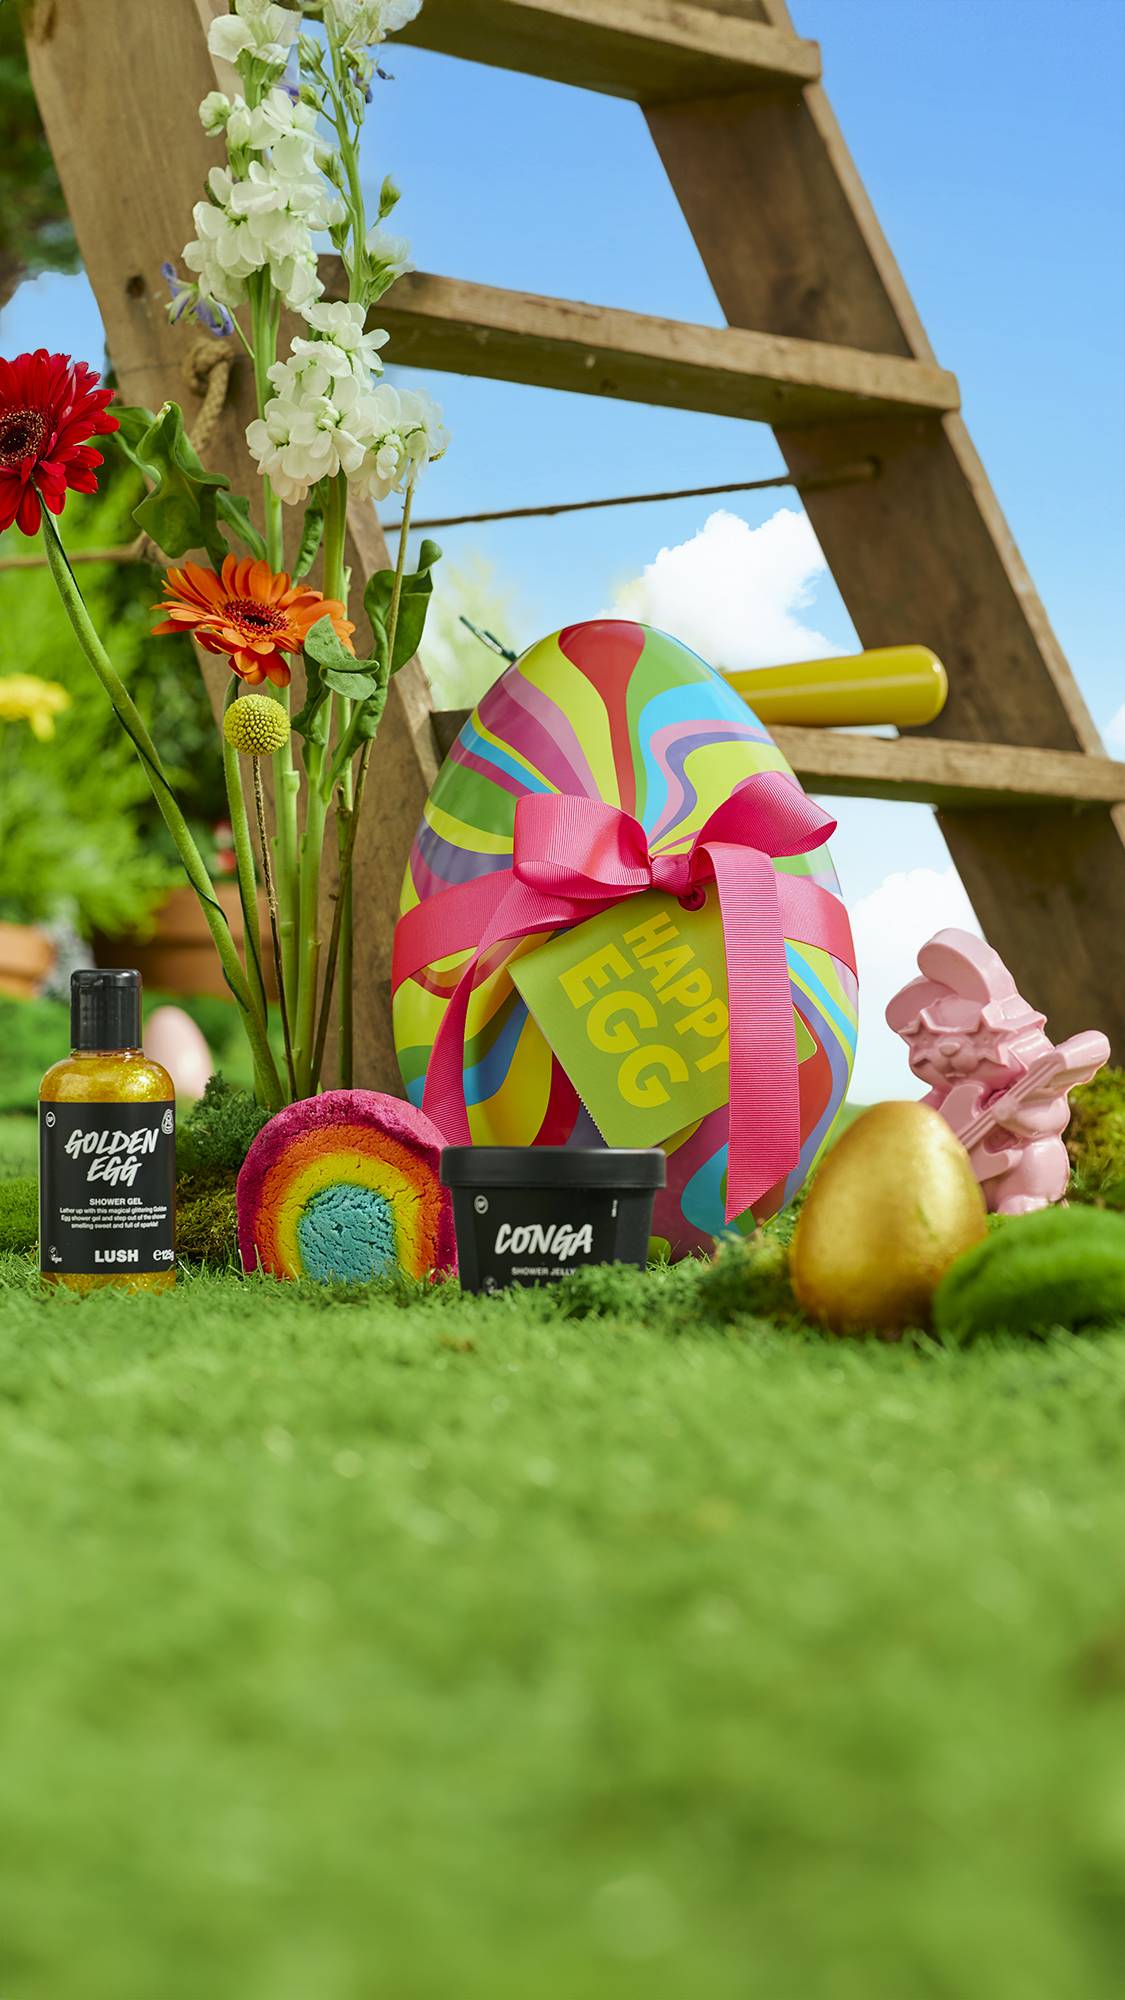 The image shows the bottom of the wooden ladder surrounded by grass, moss and flowers as the Happy Egg gift box and products are sat on the floor. 